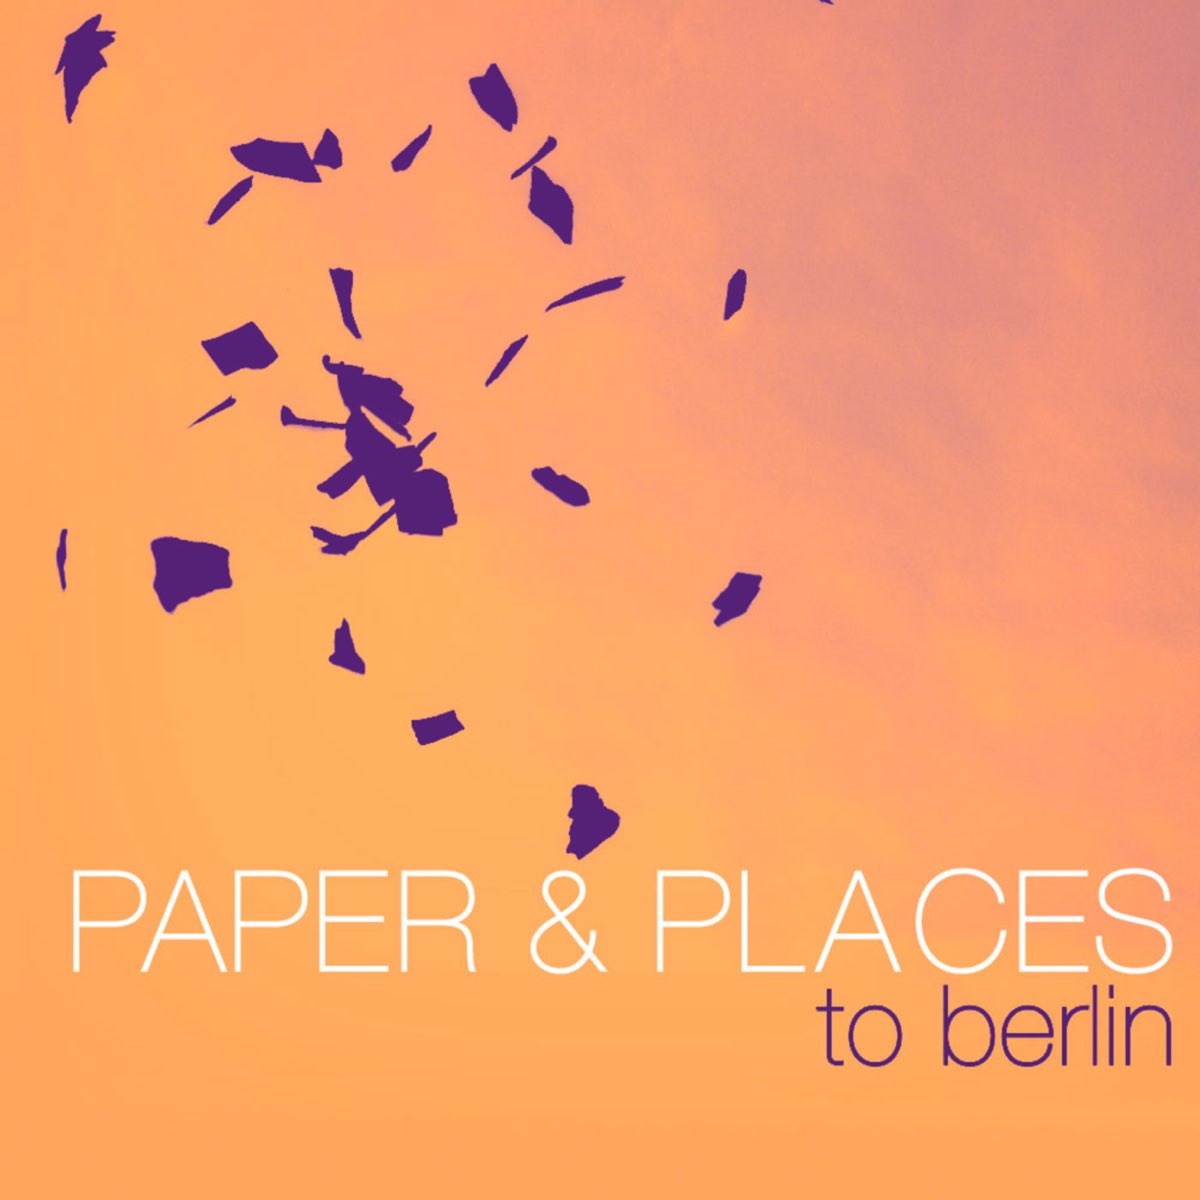 Paper places. MΣIN, #wхsхb, psychaussmove to me обложка.